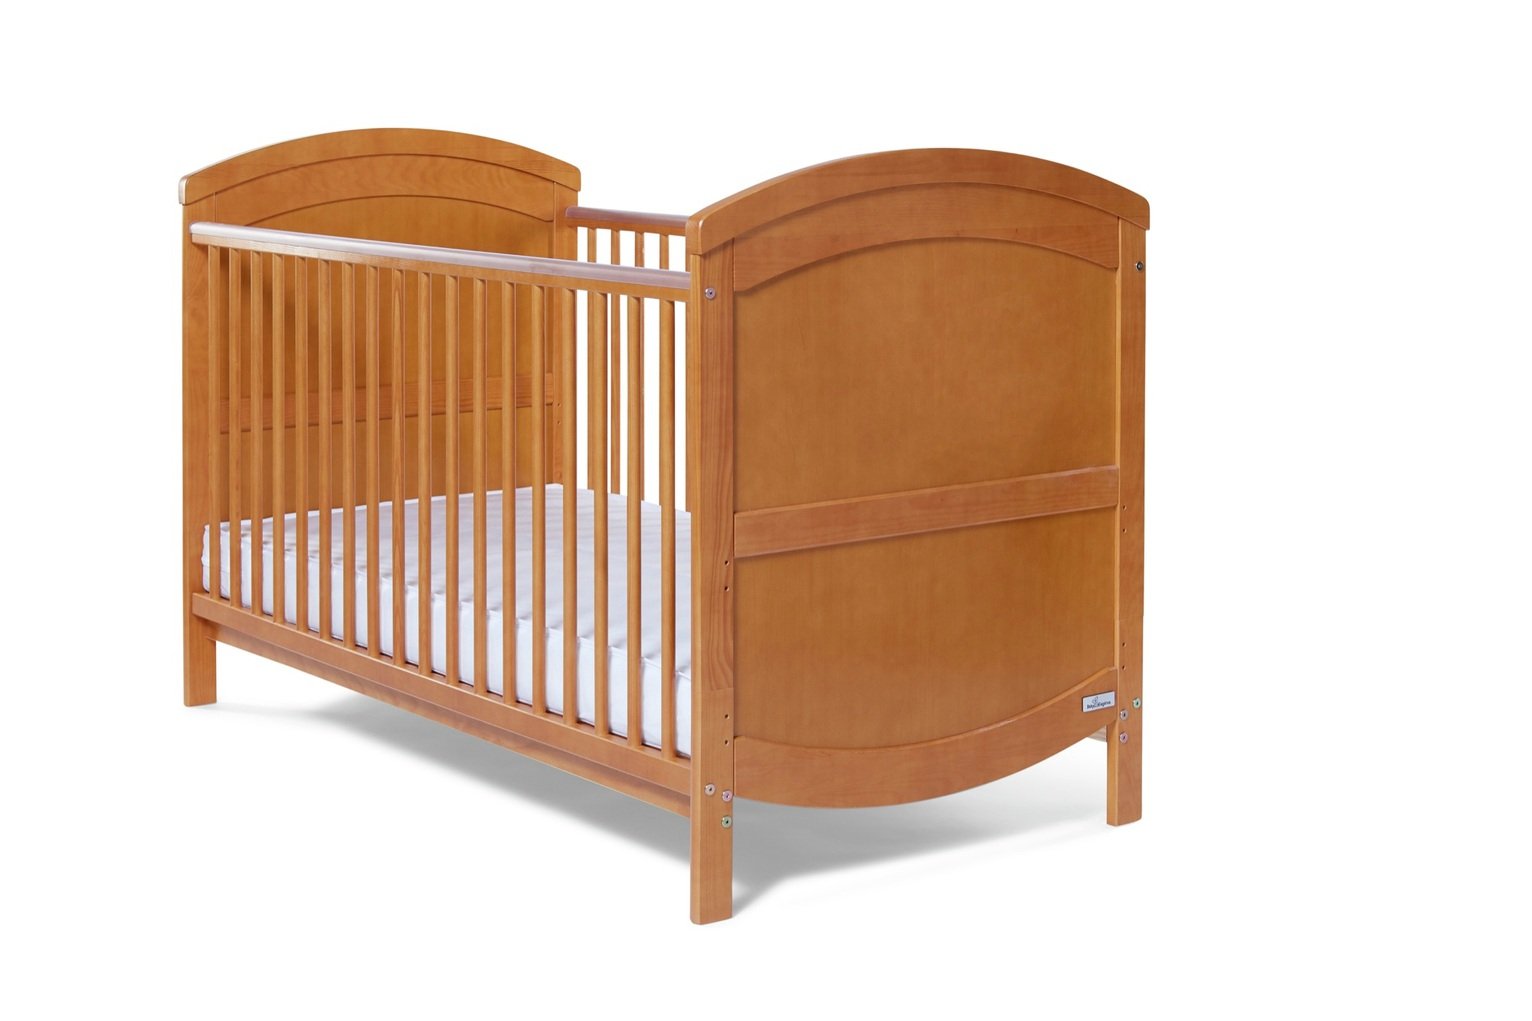 Baby Elegance Walt Cot Bed, Mattress and Sheets.